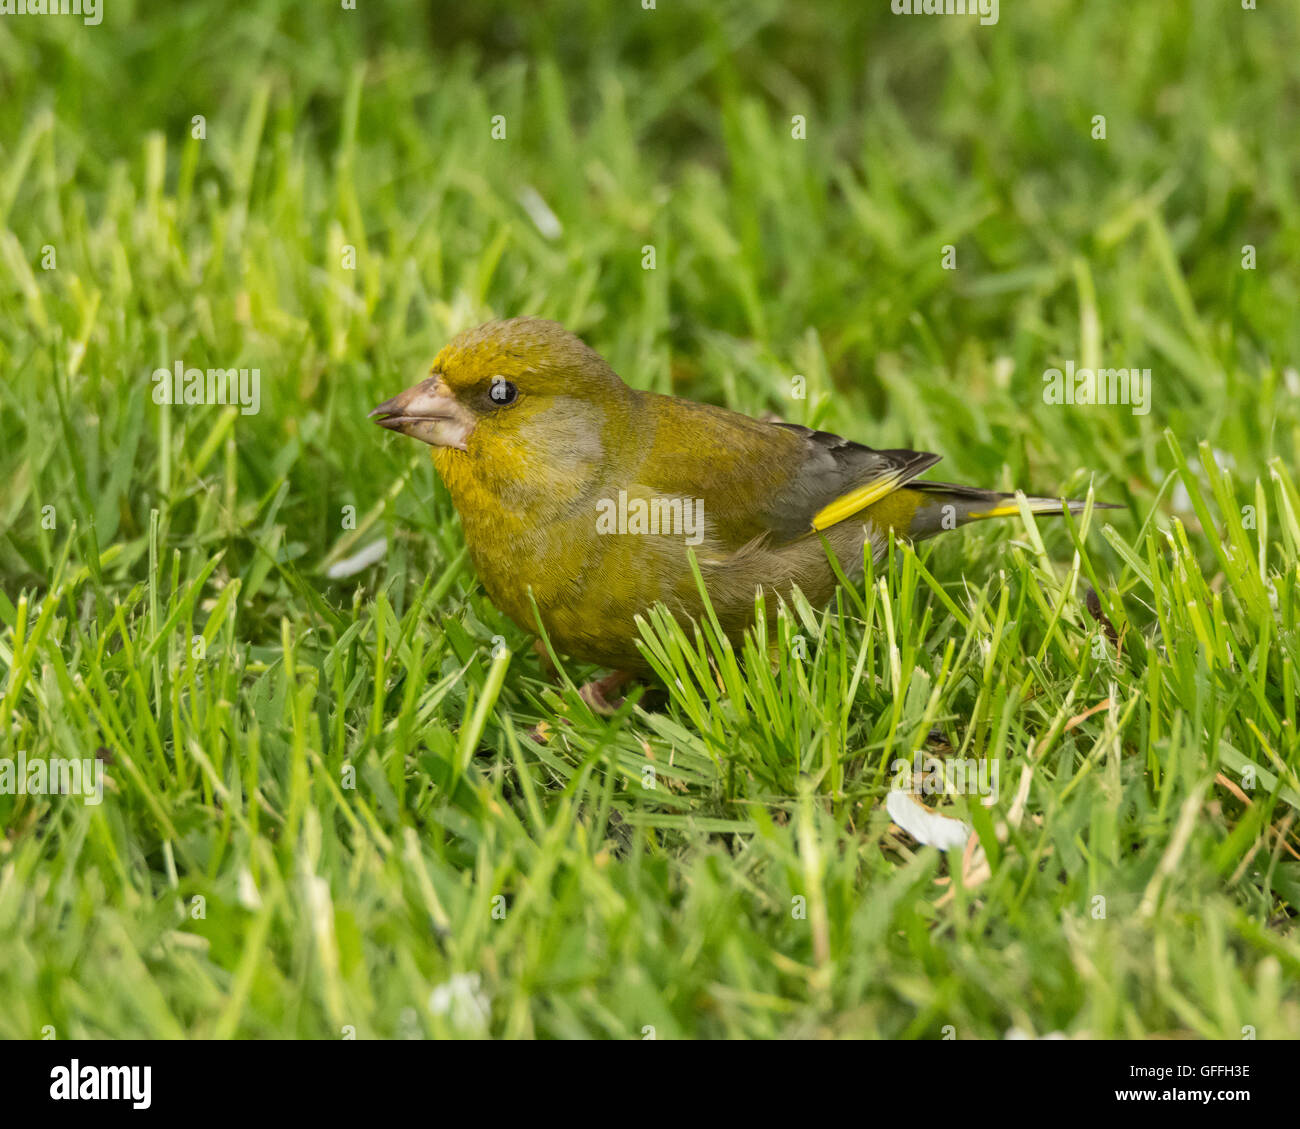 Greenfinch in Mainsriddle garden, near RSPB Mersehead, Dumfries and Galloway, UK Stock Photo